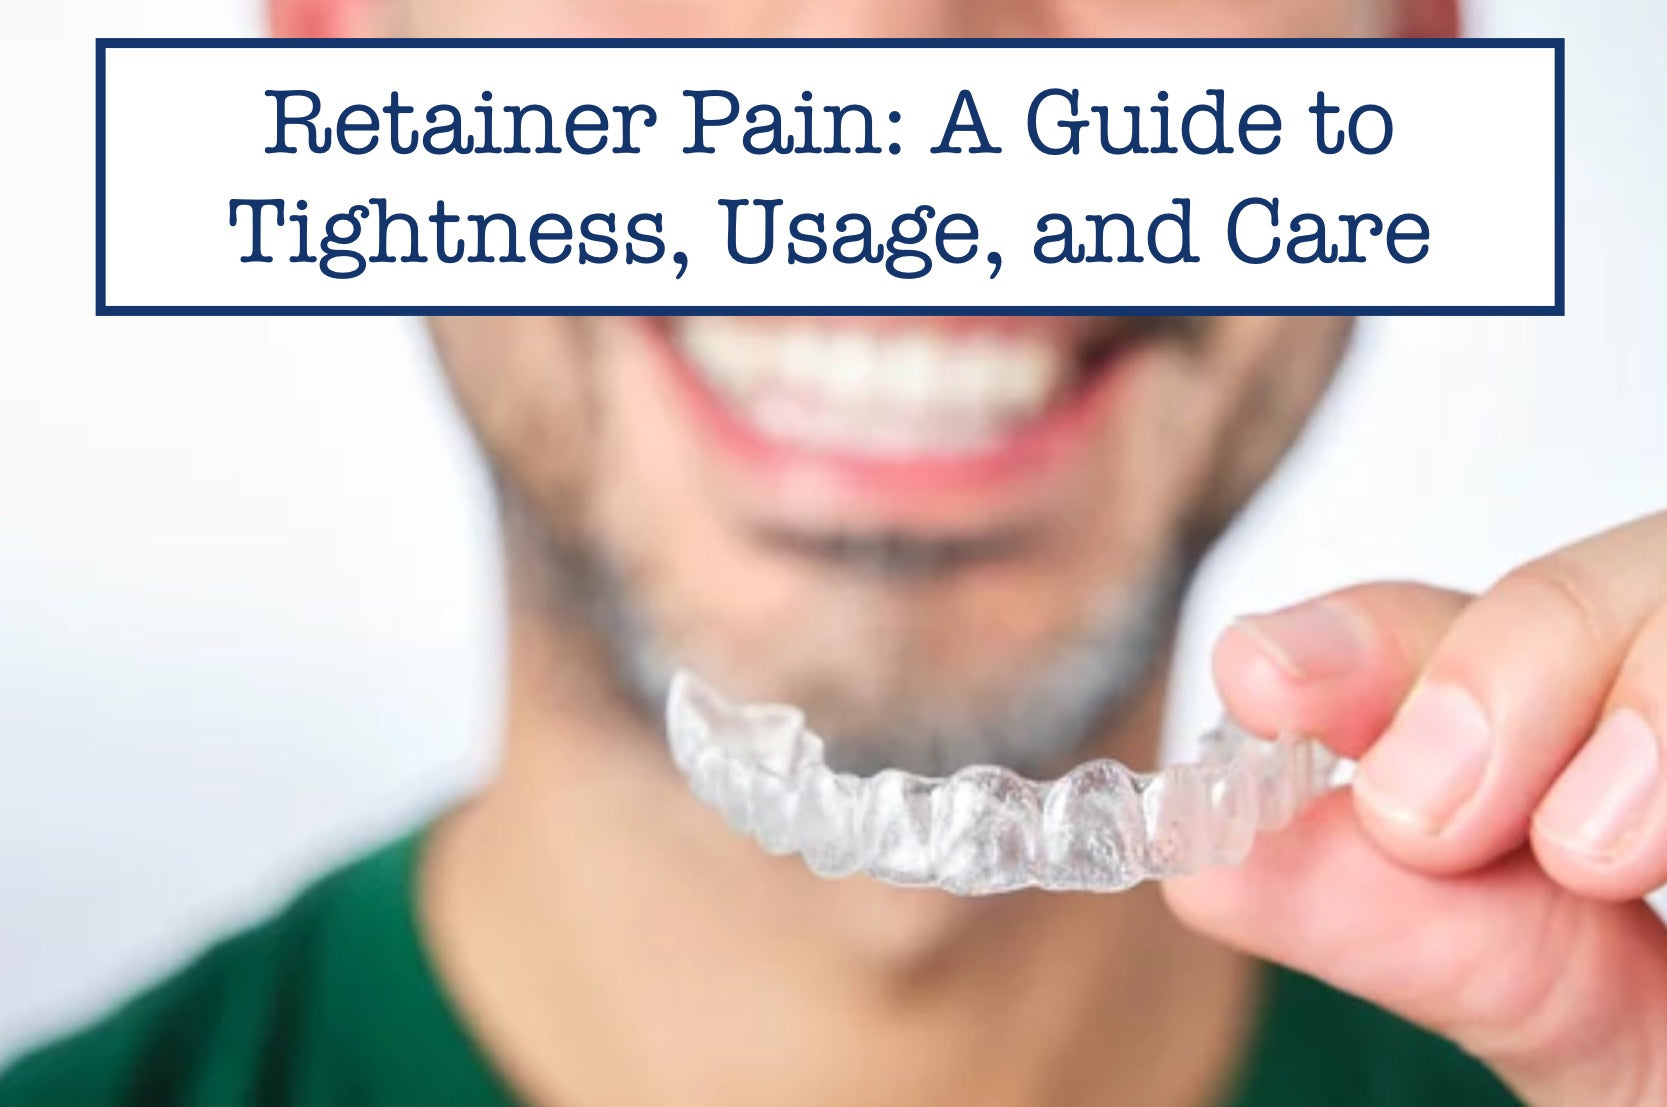 Retainer Pain: A Guide to Tightness, Usage, and Care